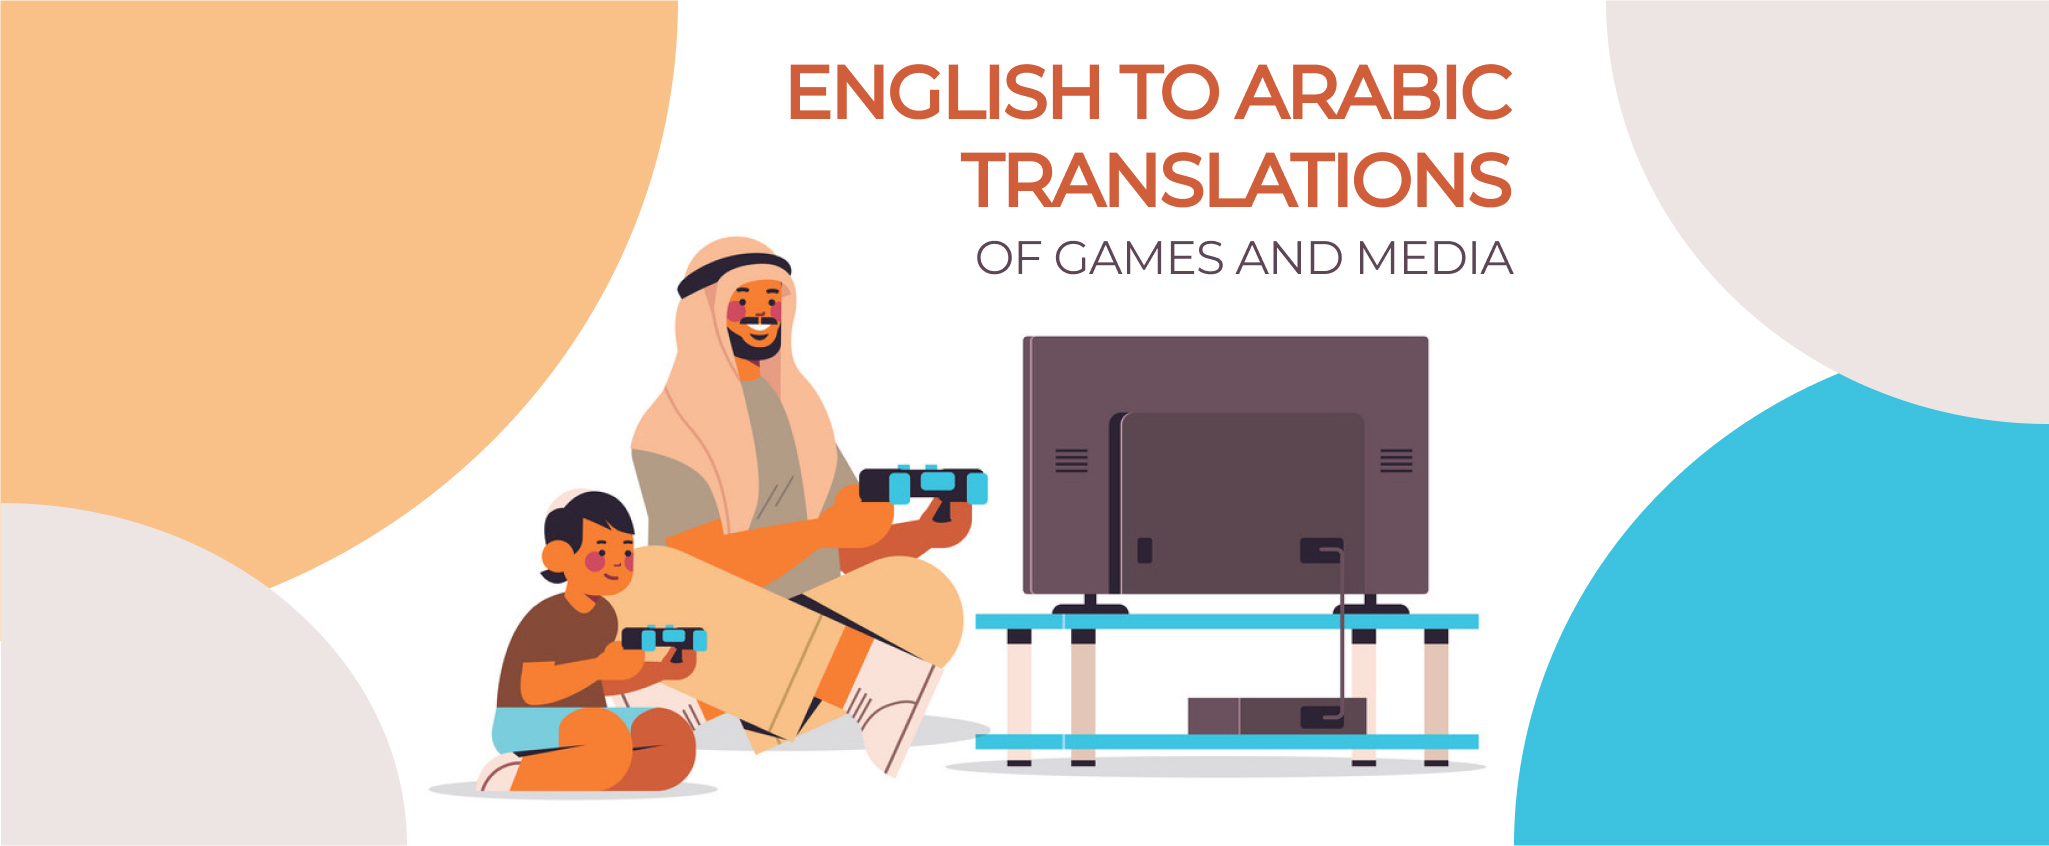 English to Arabic Translations of Games and Media